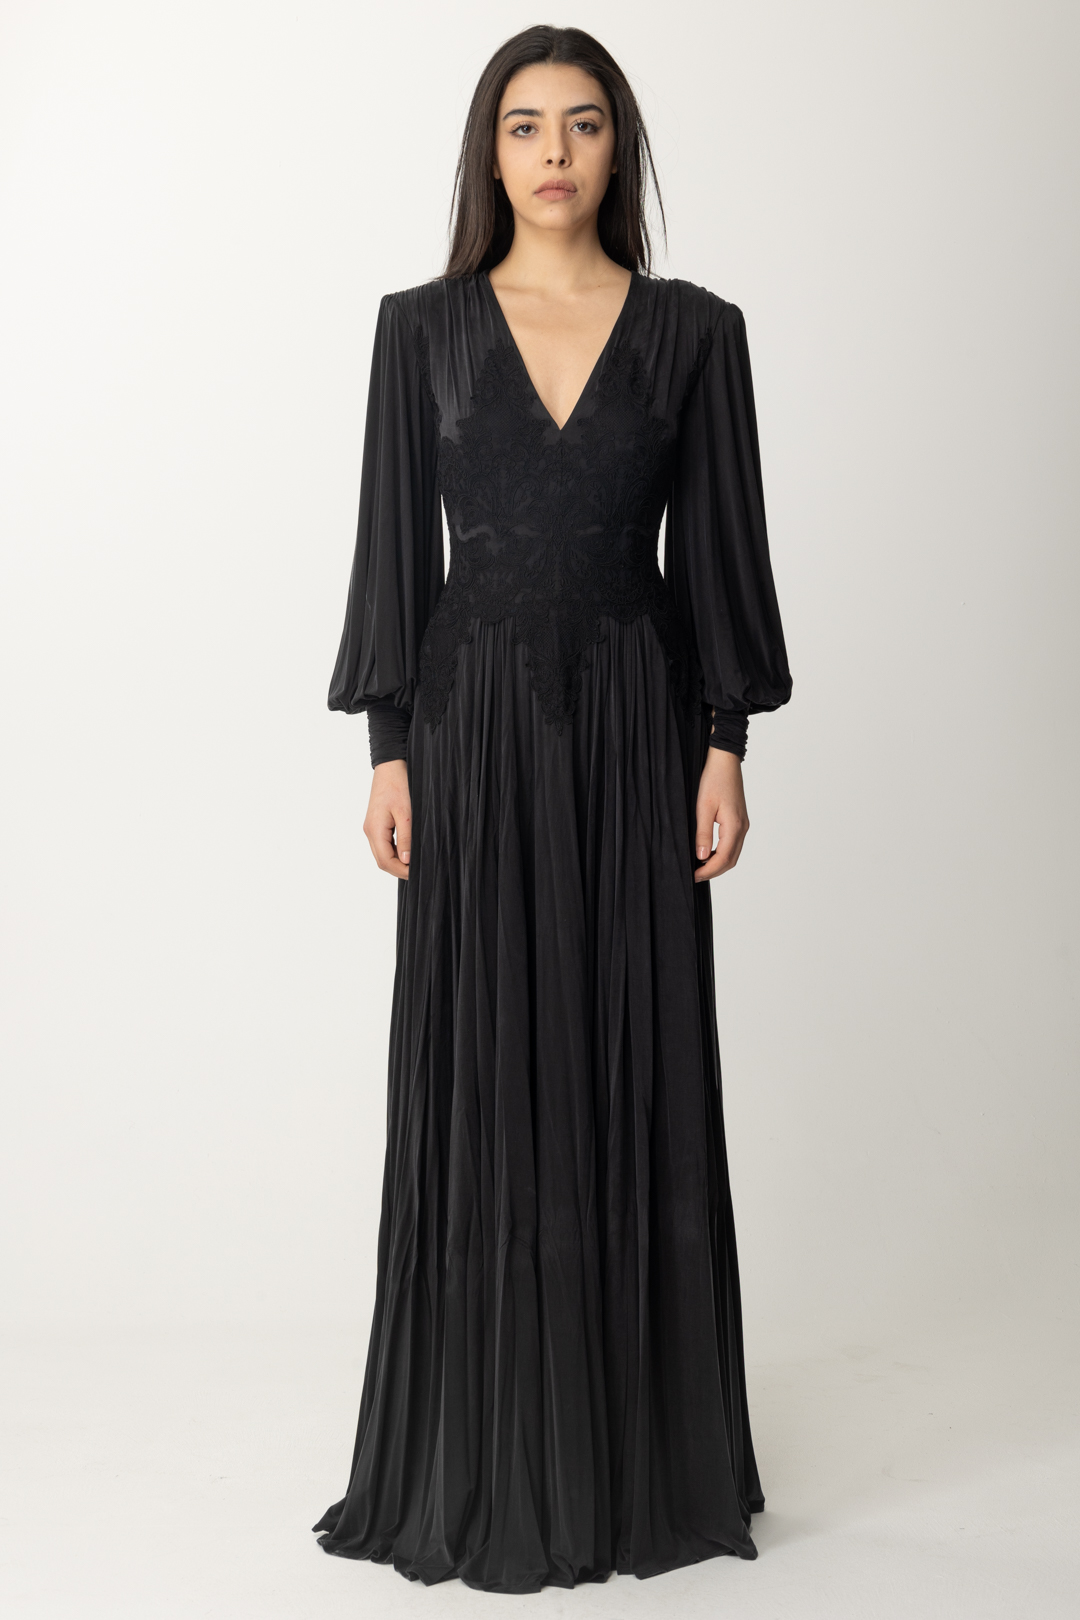 Preview: Elisabetta Franchi Red Carpet Dress with Lace Bodice Nero